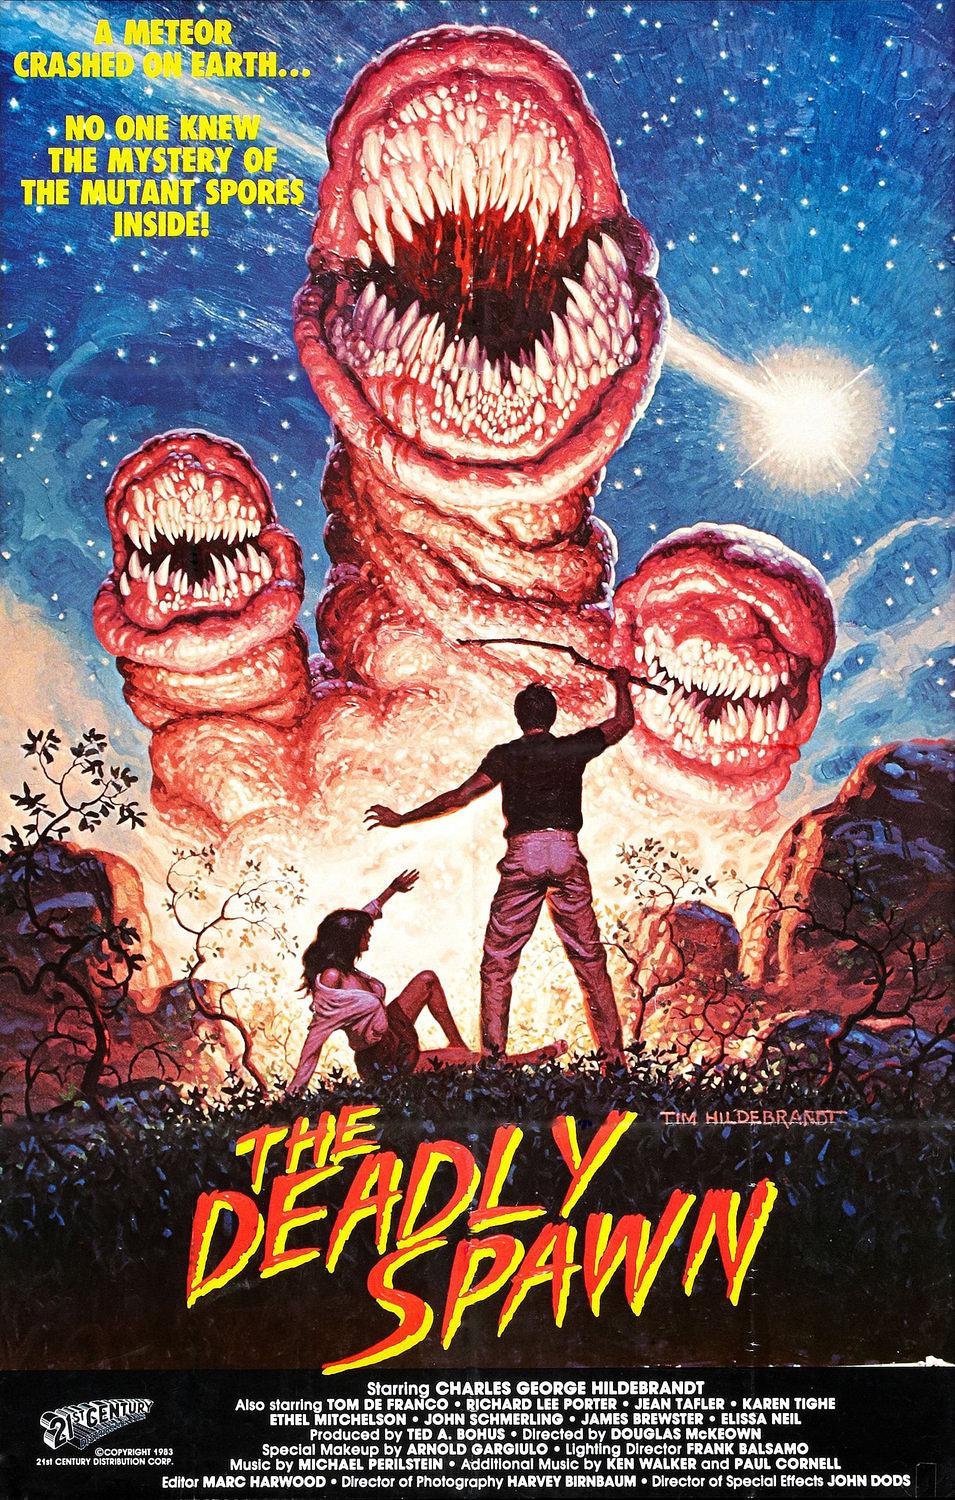 / The.Deadly.Spawn.1983.1080p.BluRay.x264-GUACAMOLE 5.46GB-1.png